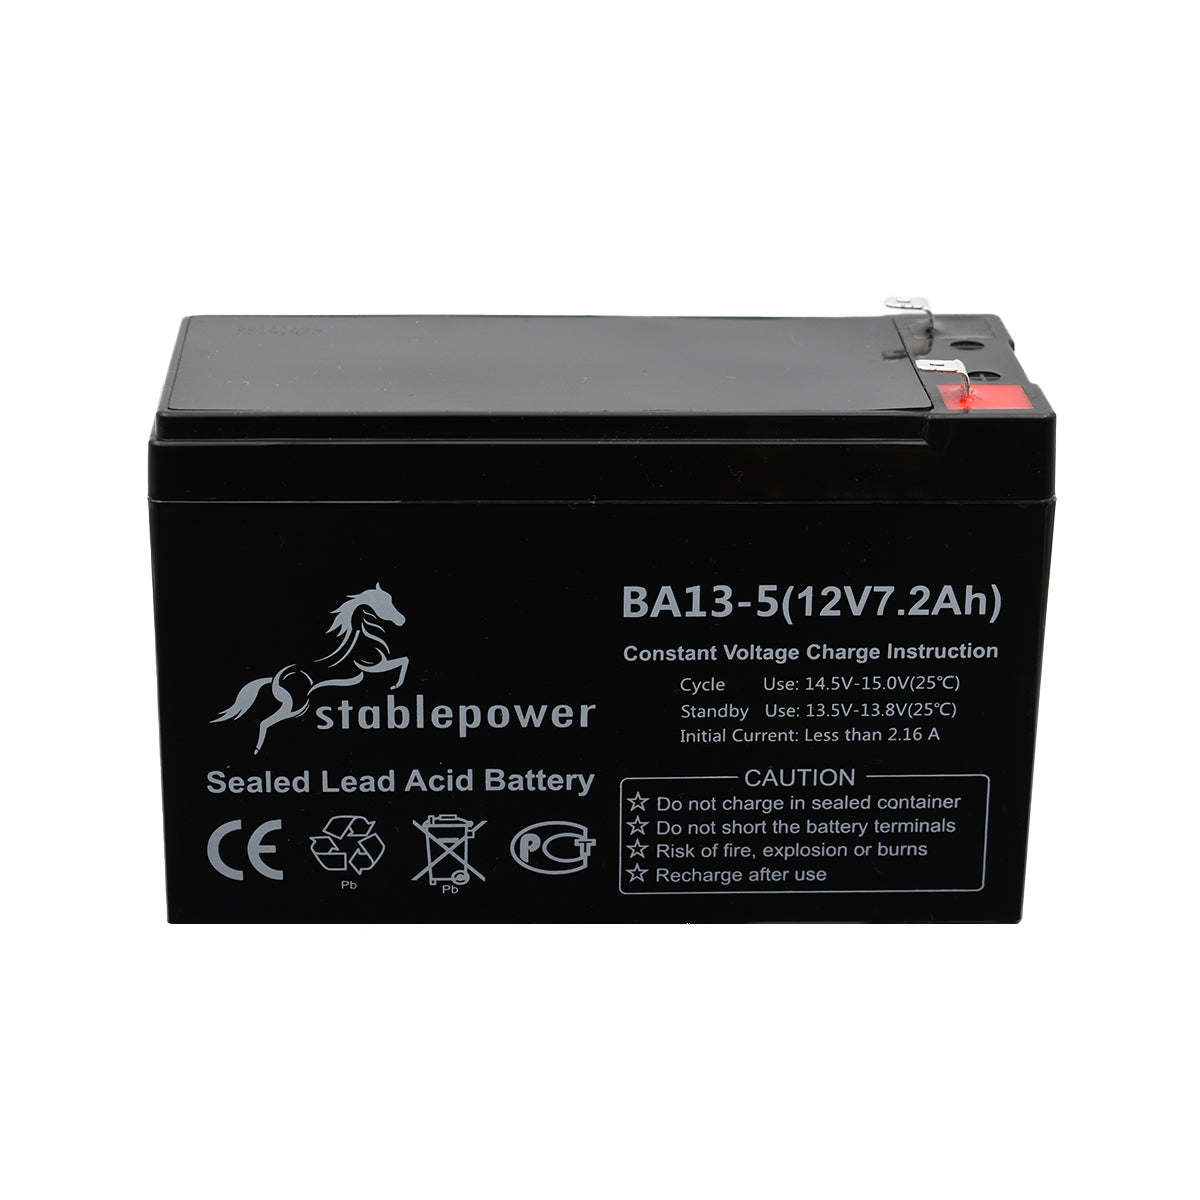 Stablepower 12V 7.2AH Rechargeable Sealed Lead Acid Battery Image 1 BA13-5N1